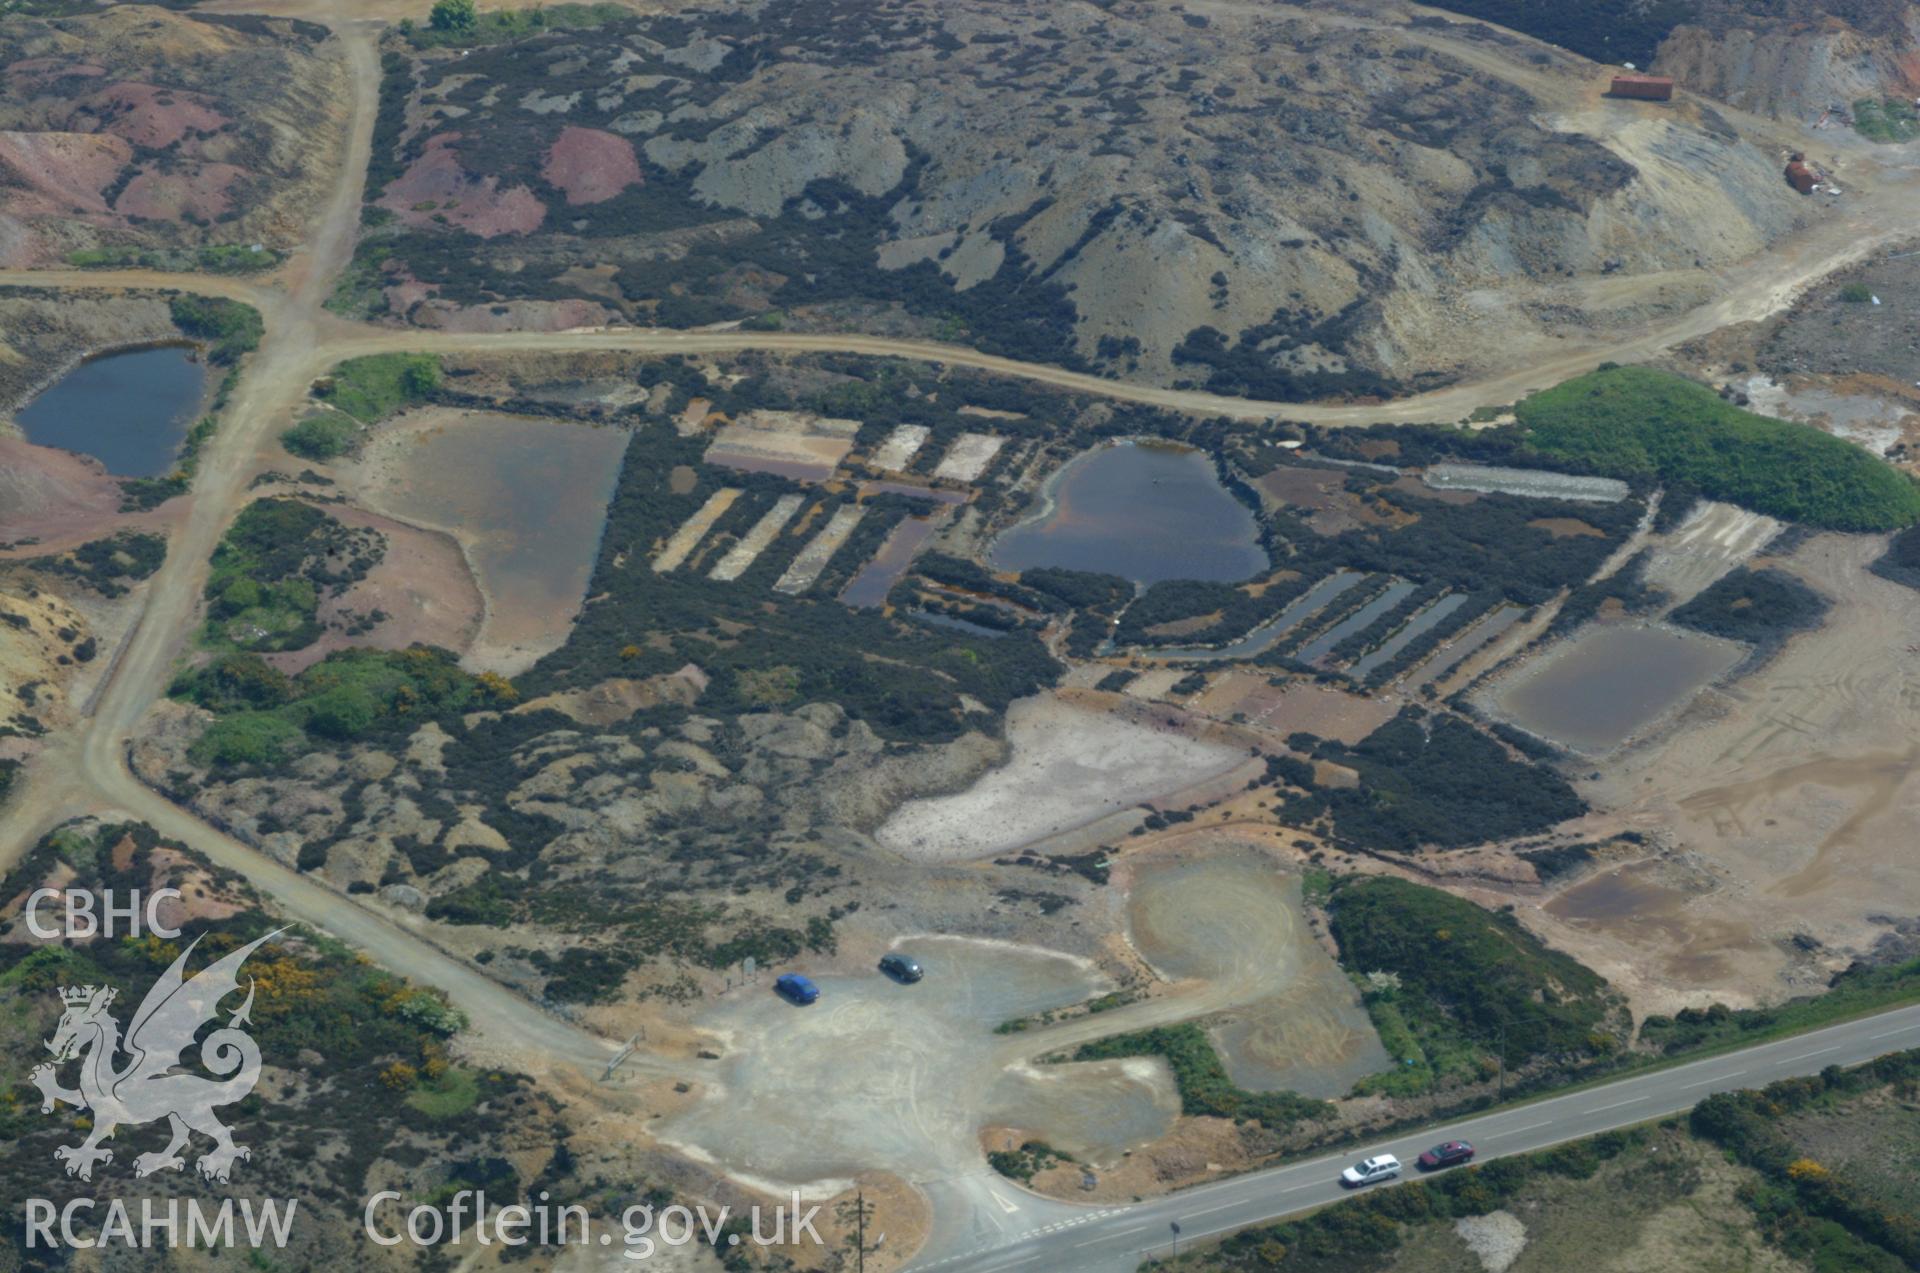 RCAHMW colour oblique aerial photograph of Solution Ponds, Parys Mountain. Taken on 26 May 2004 by Toby Driver